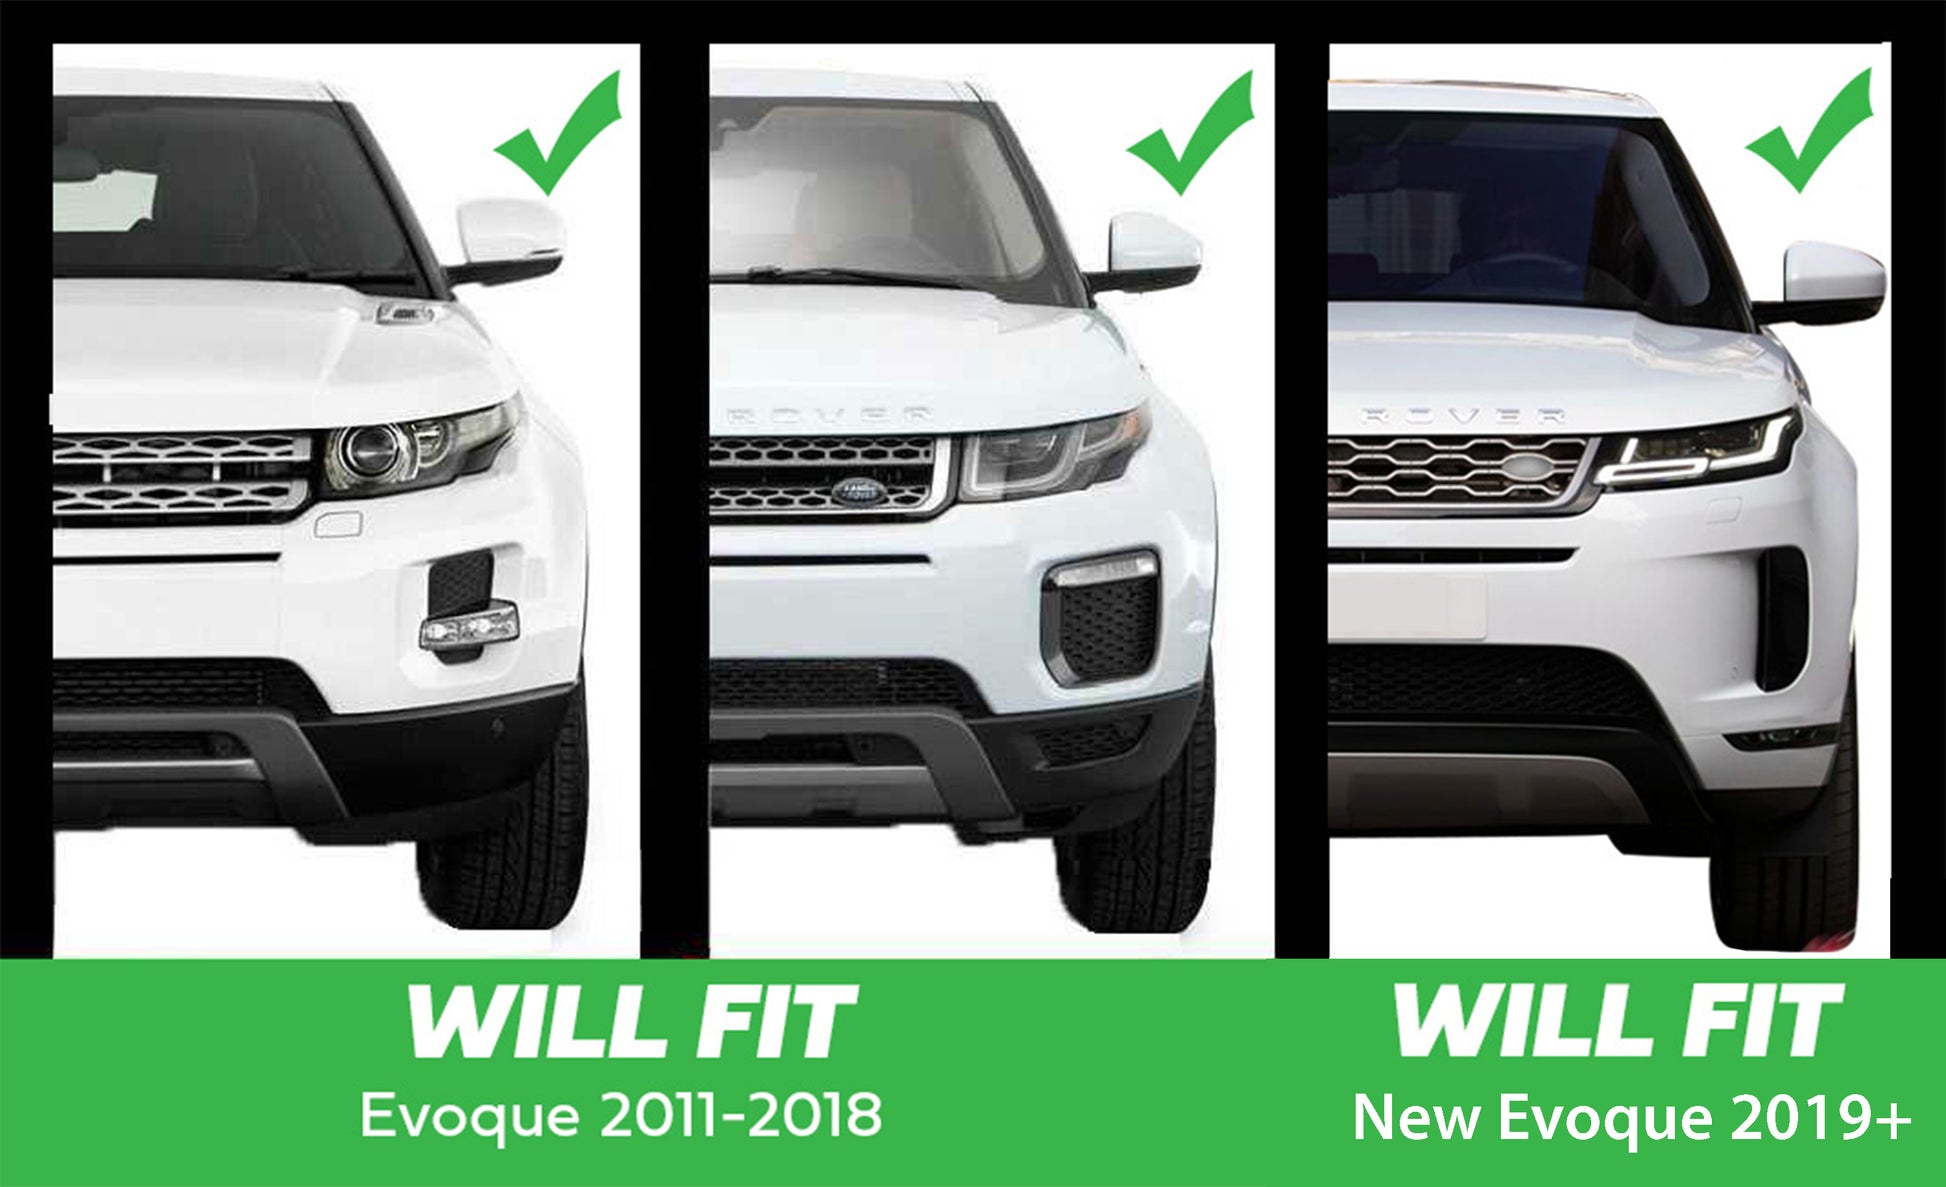 Genuine 7pc Clips for the Battery Cover on the Range Rover Evoque